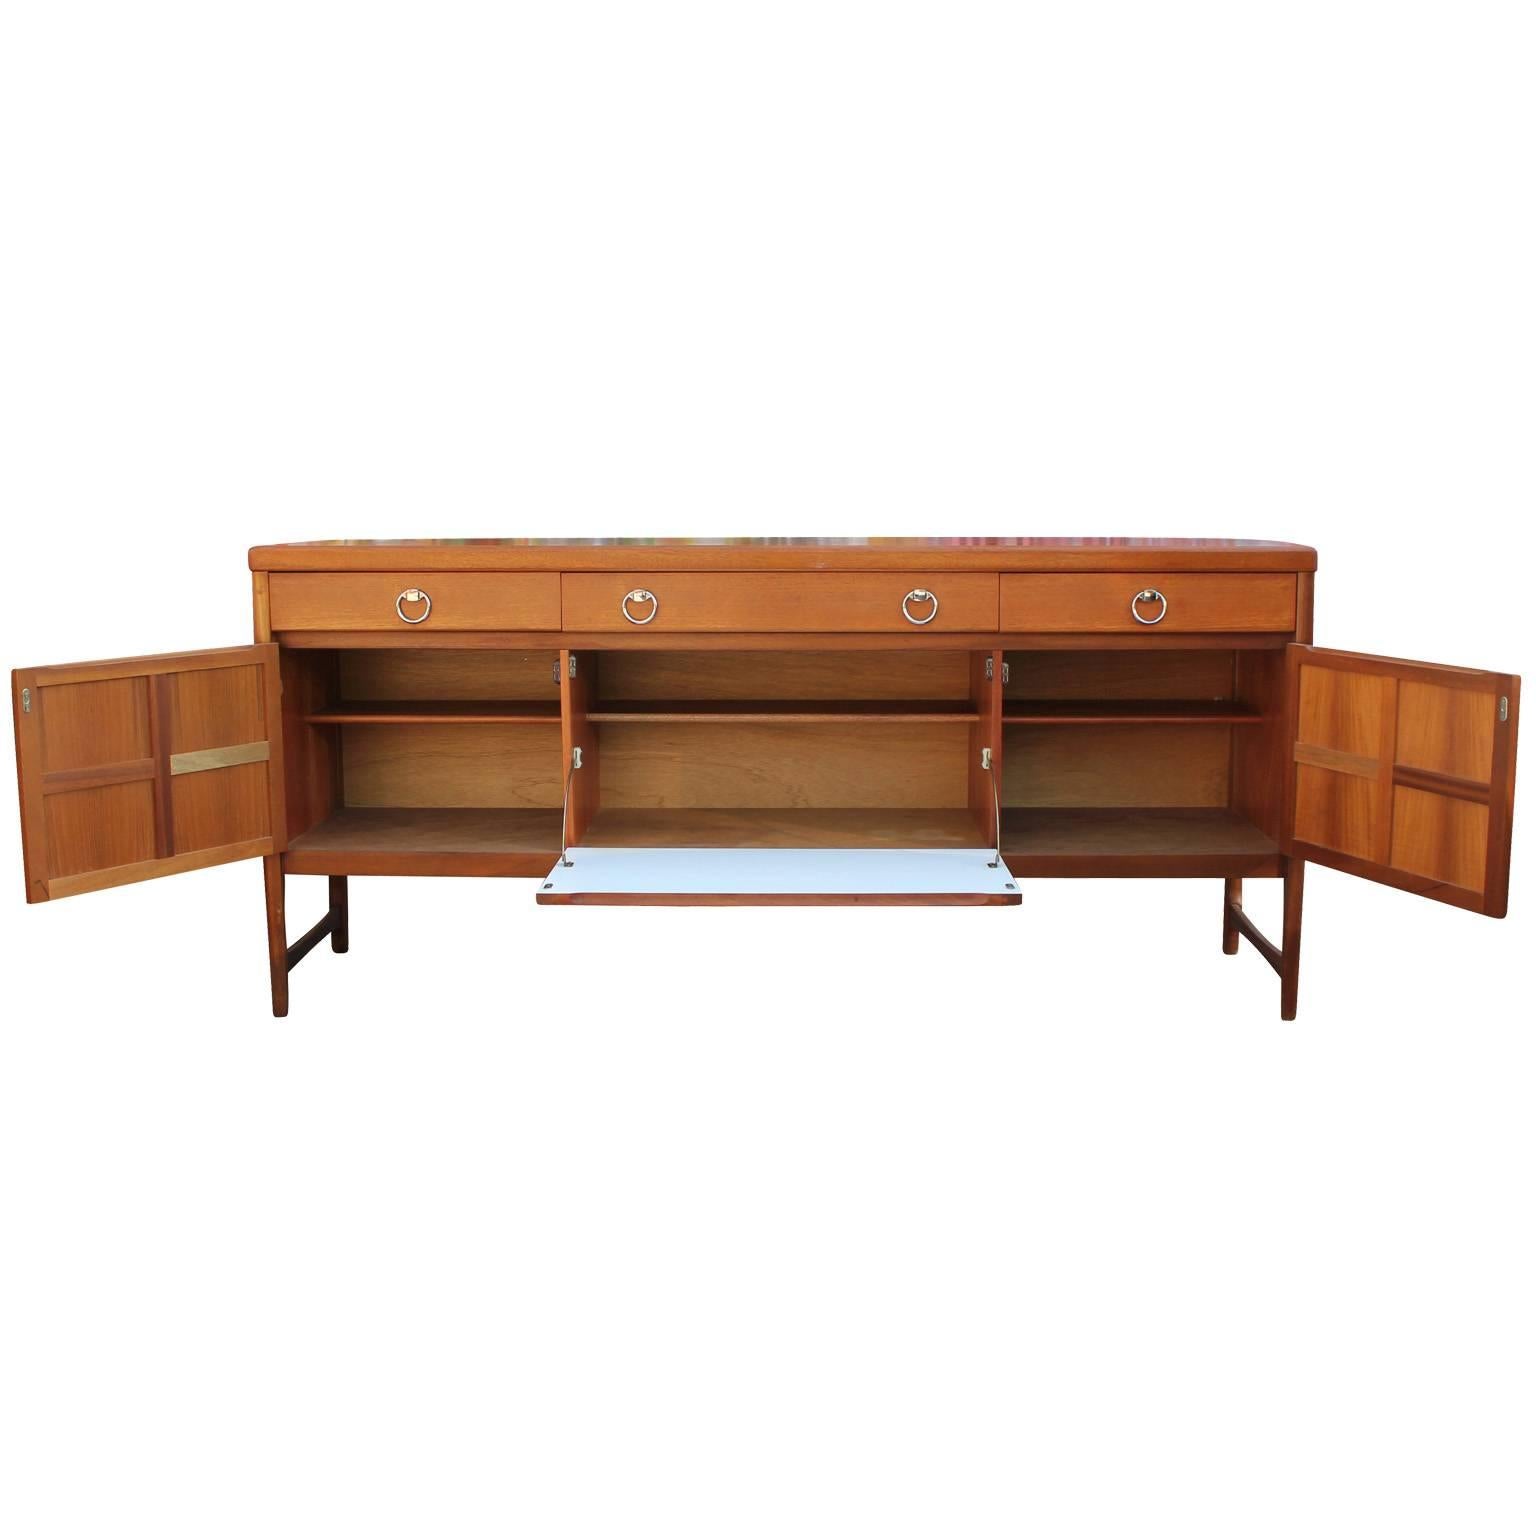 European Handsome Mid Century Modern Mahgony and Teak Sideboard with Chrome Hardware